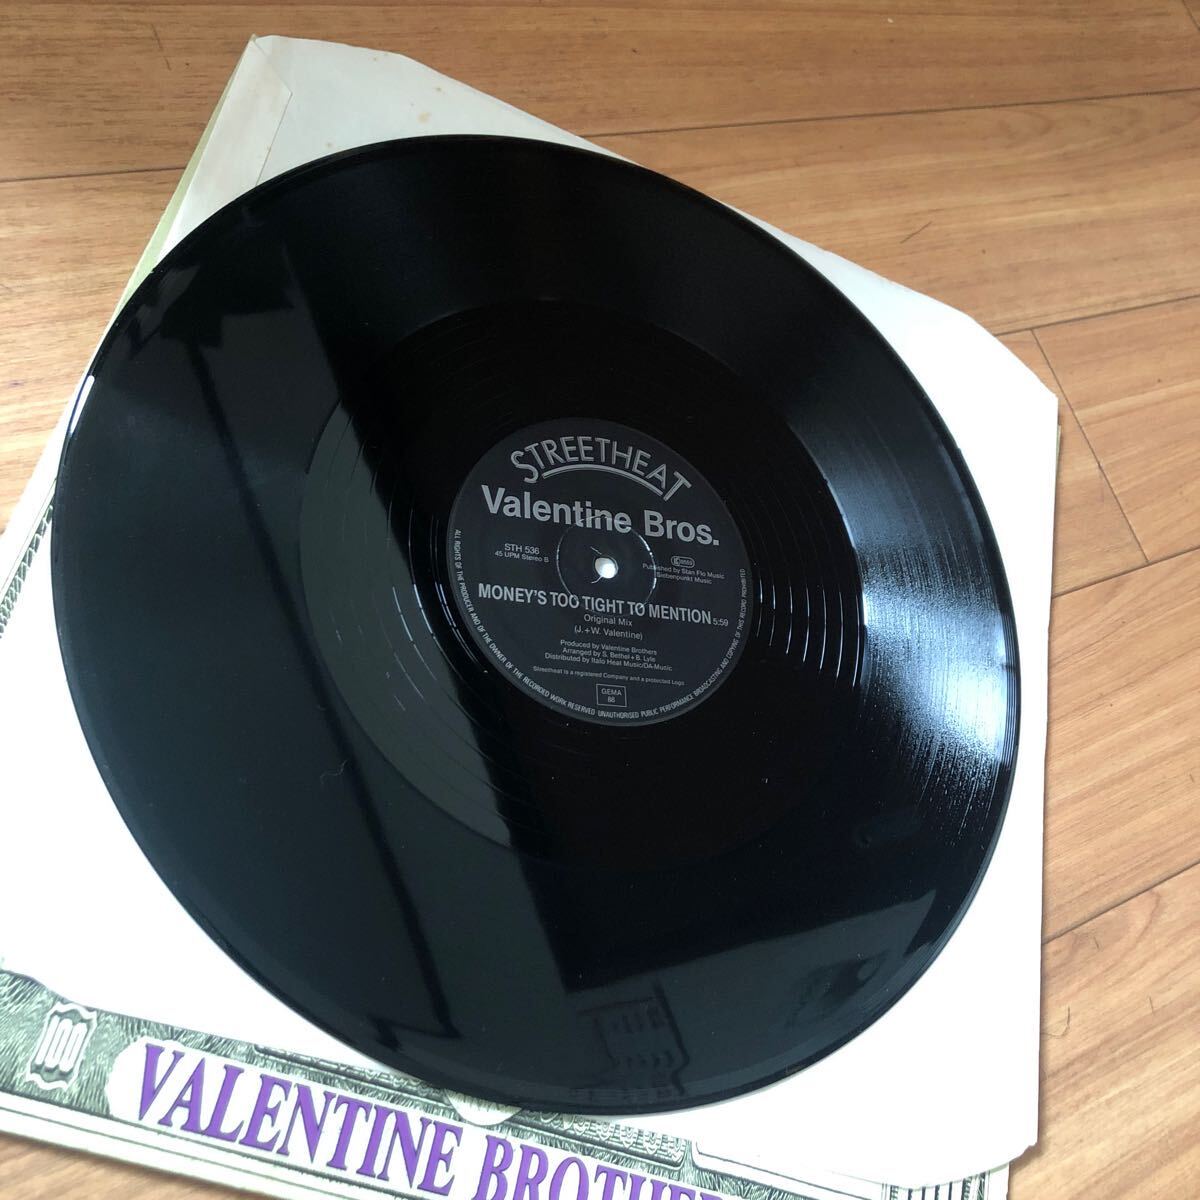 12’ Valentine Brothers-Money’s too tight to mention/ 88 dollar mixの画像4